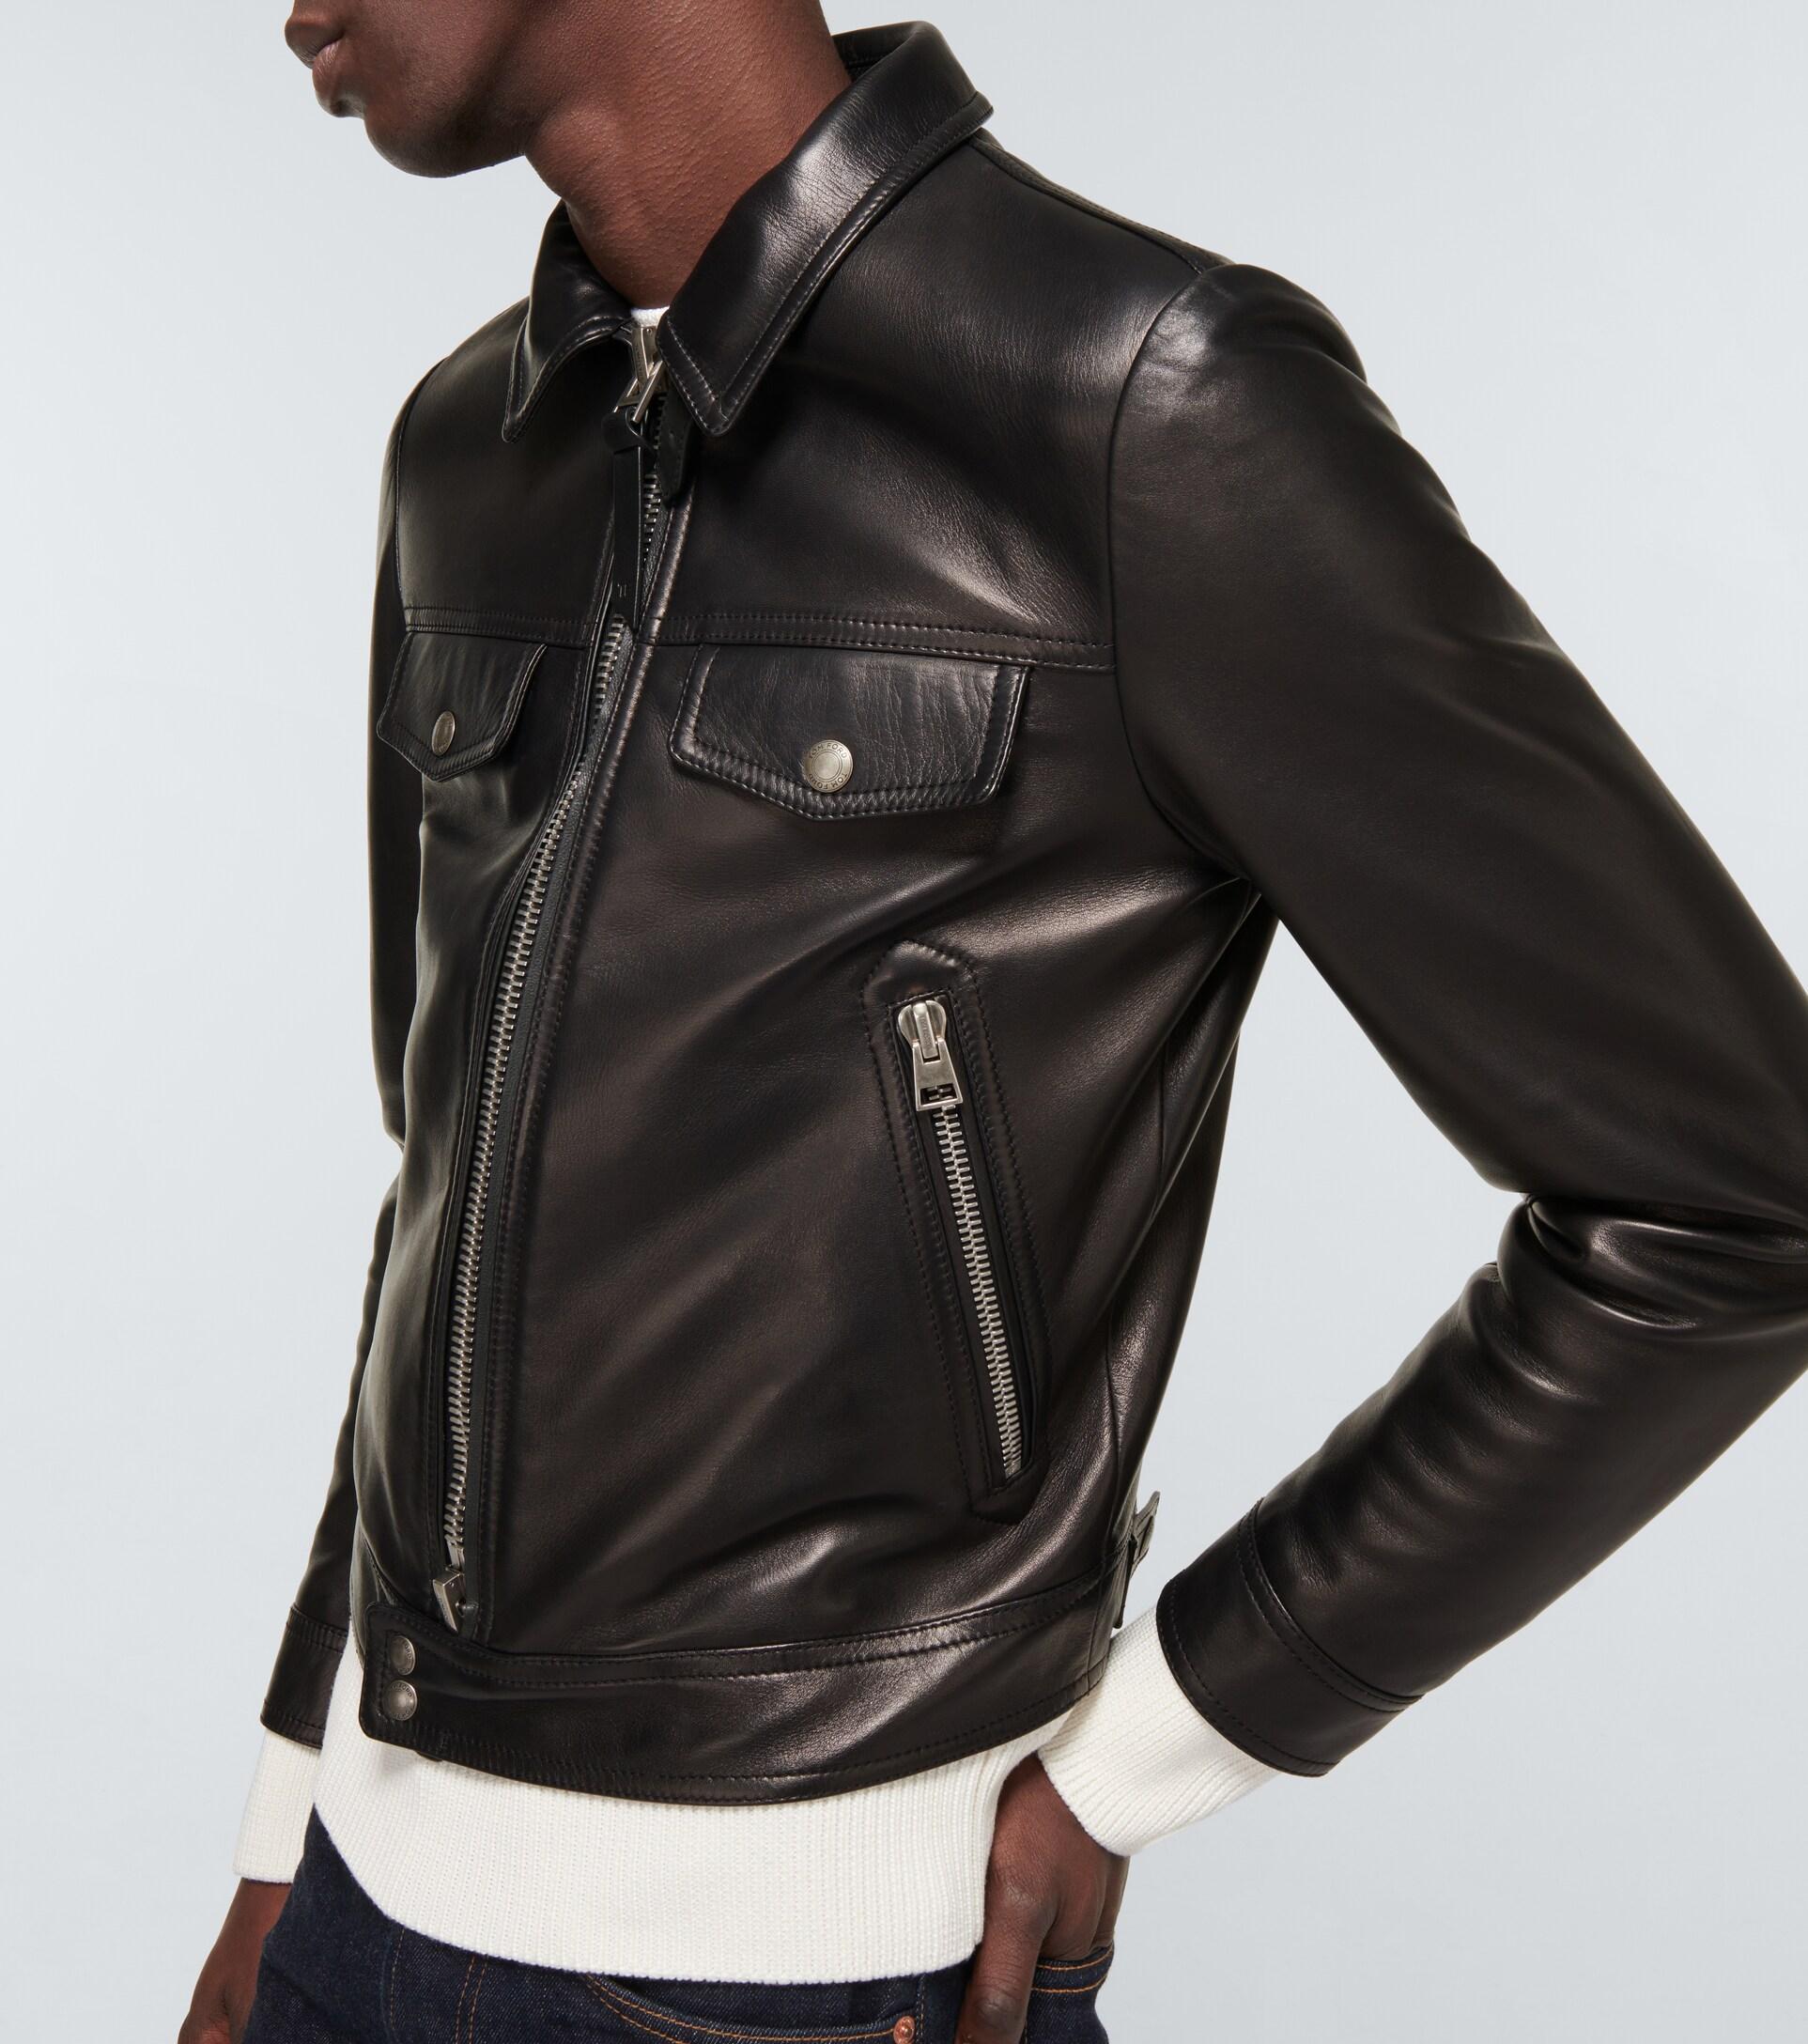 Actualizar 101+ imagen tom ford men's leather jacket - Abzlocal.mx